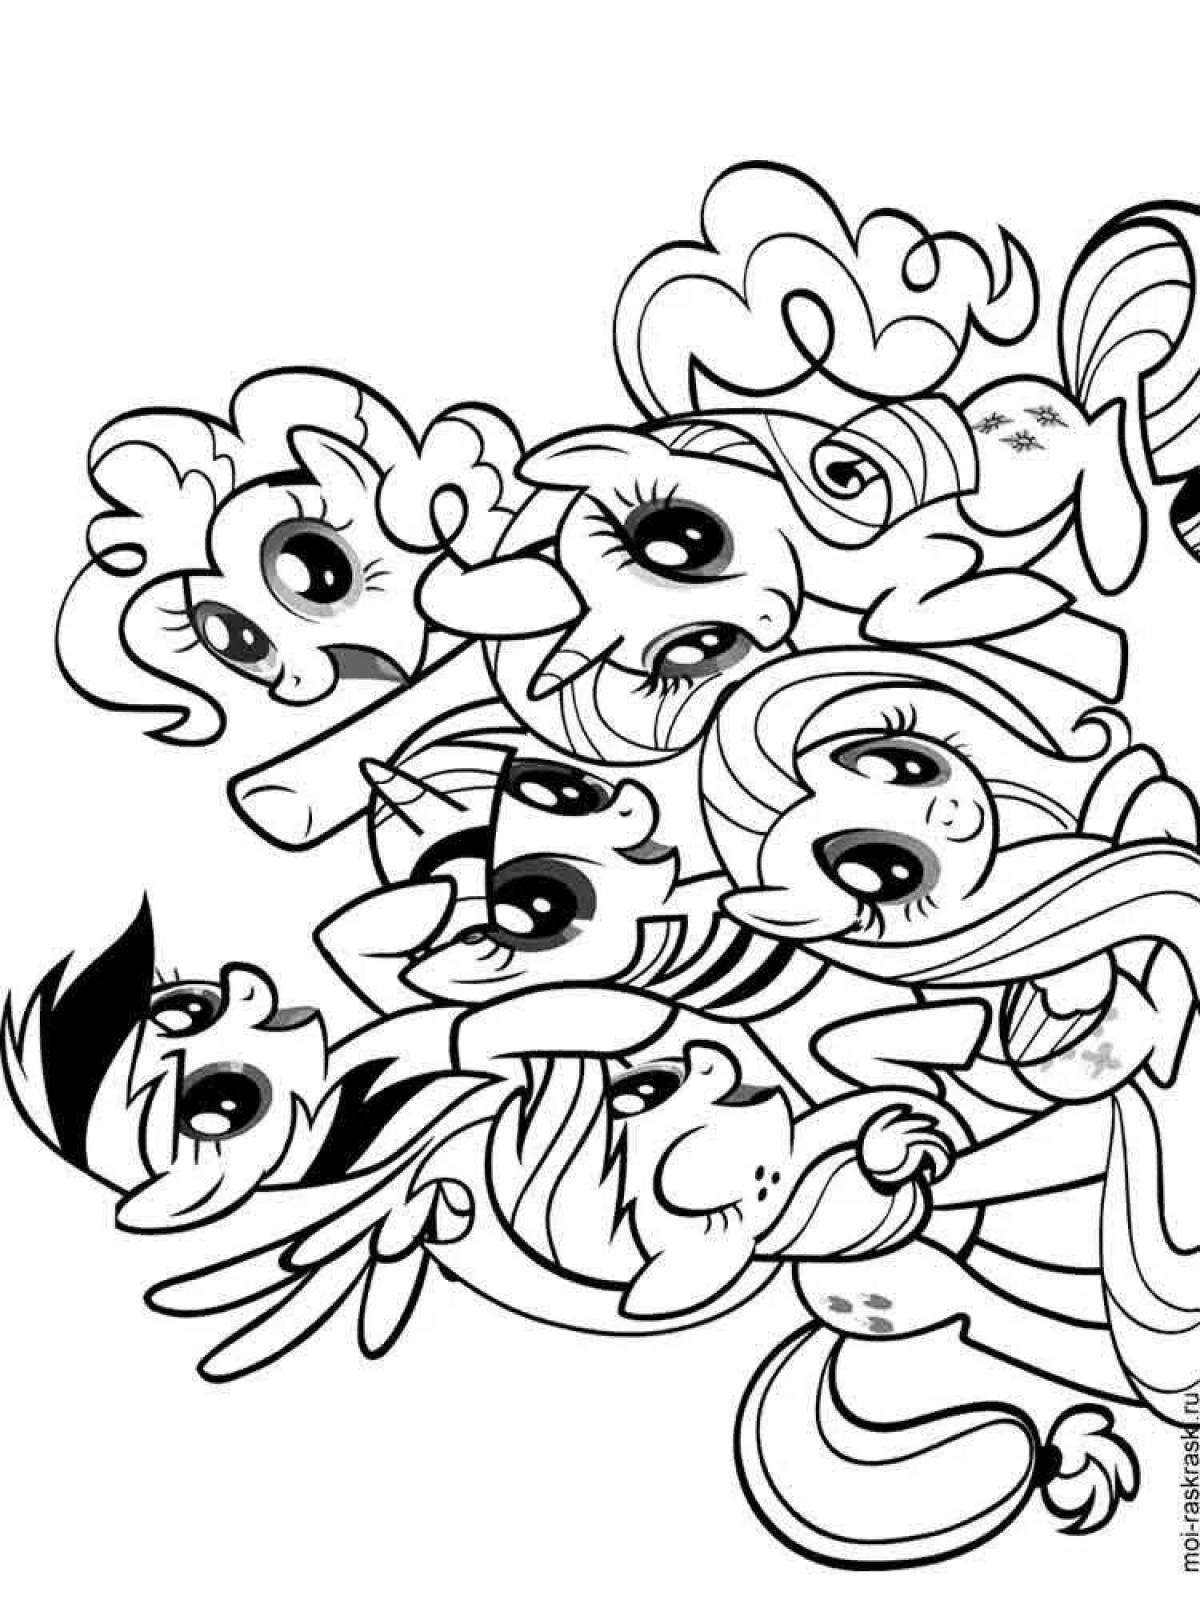 Coloring page sparkling pony turn on